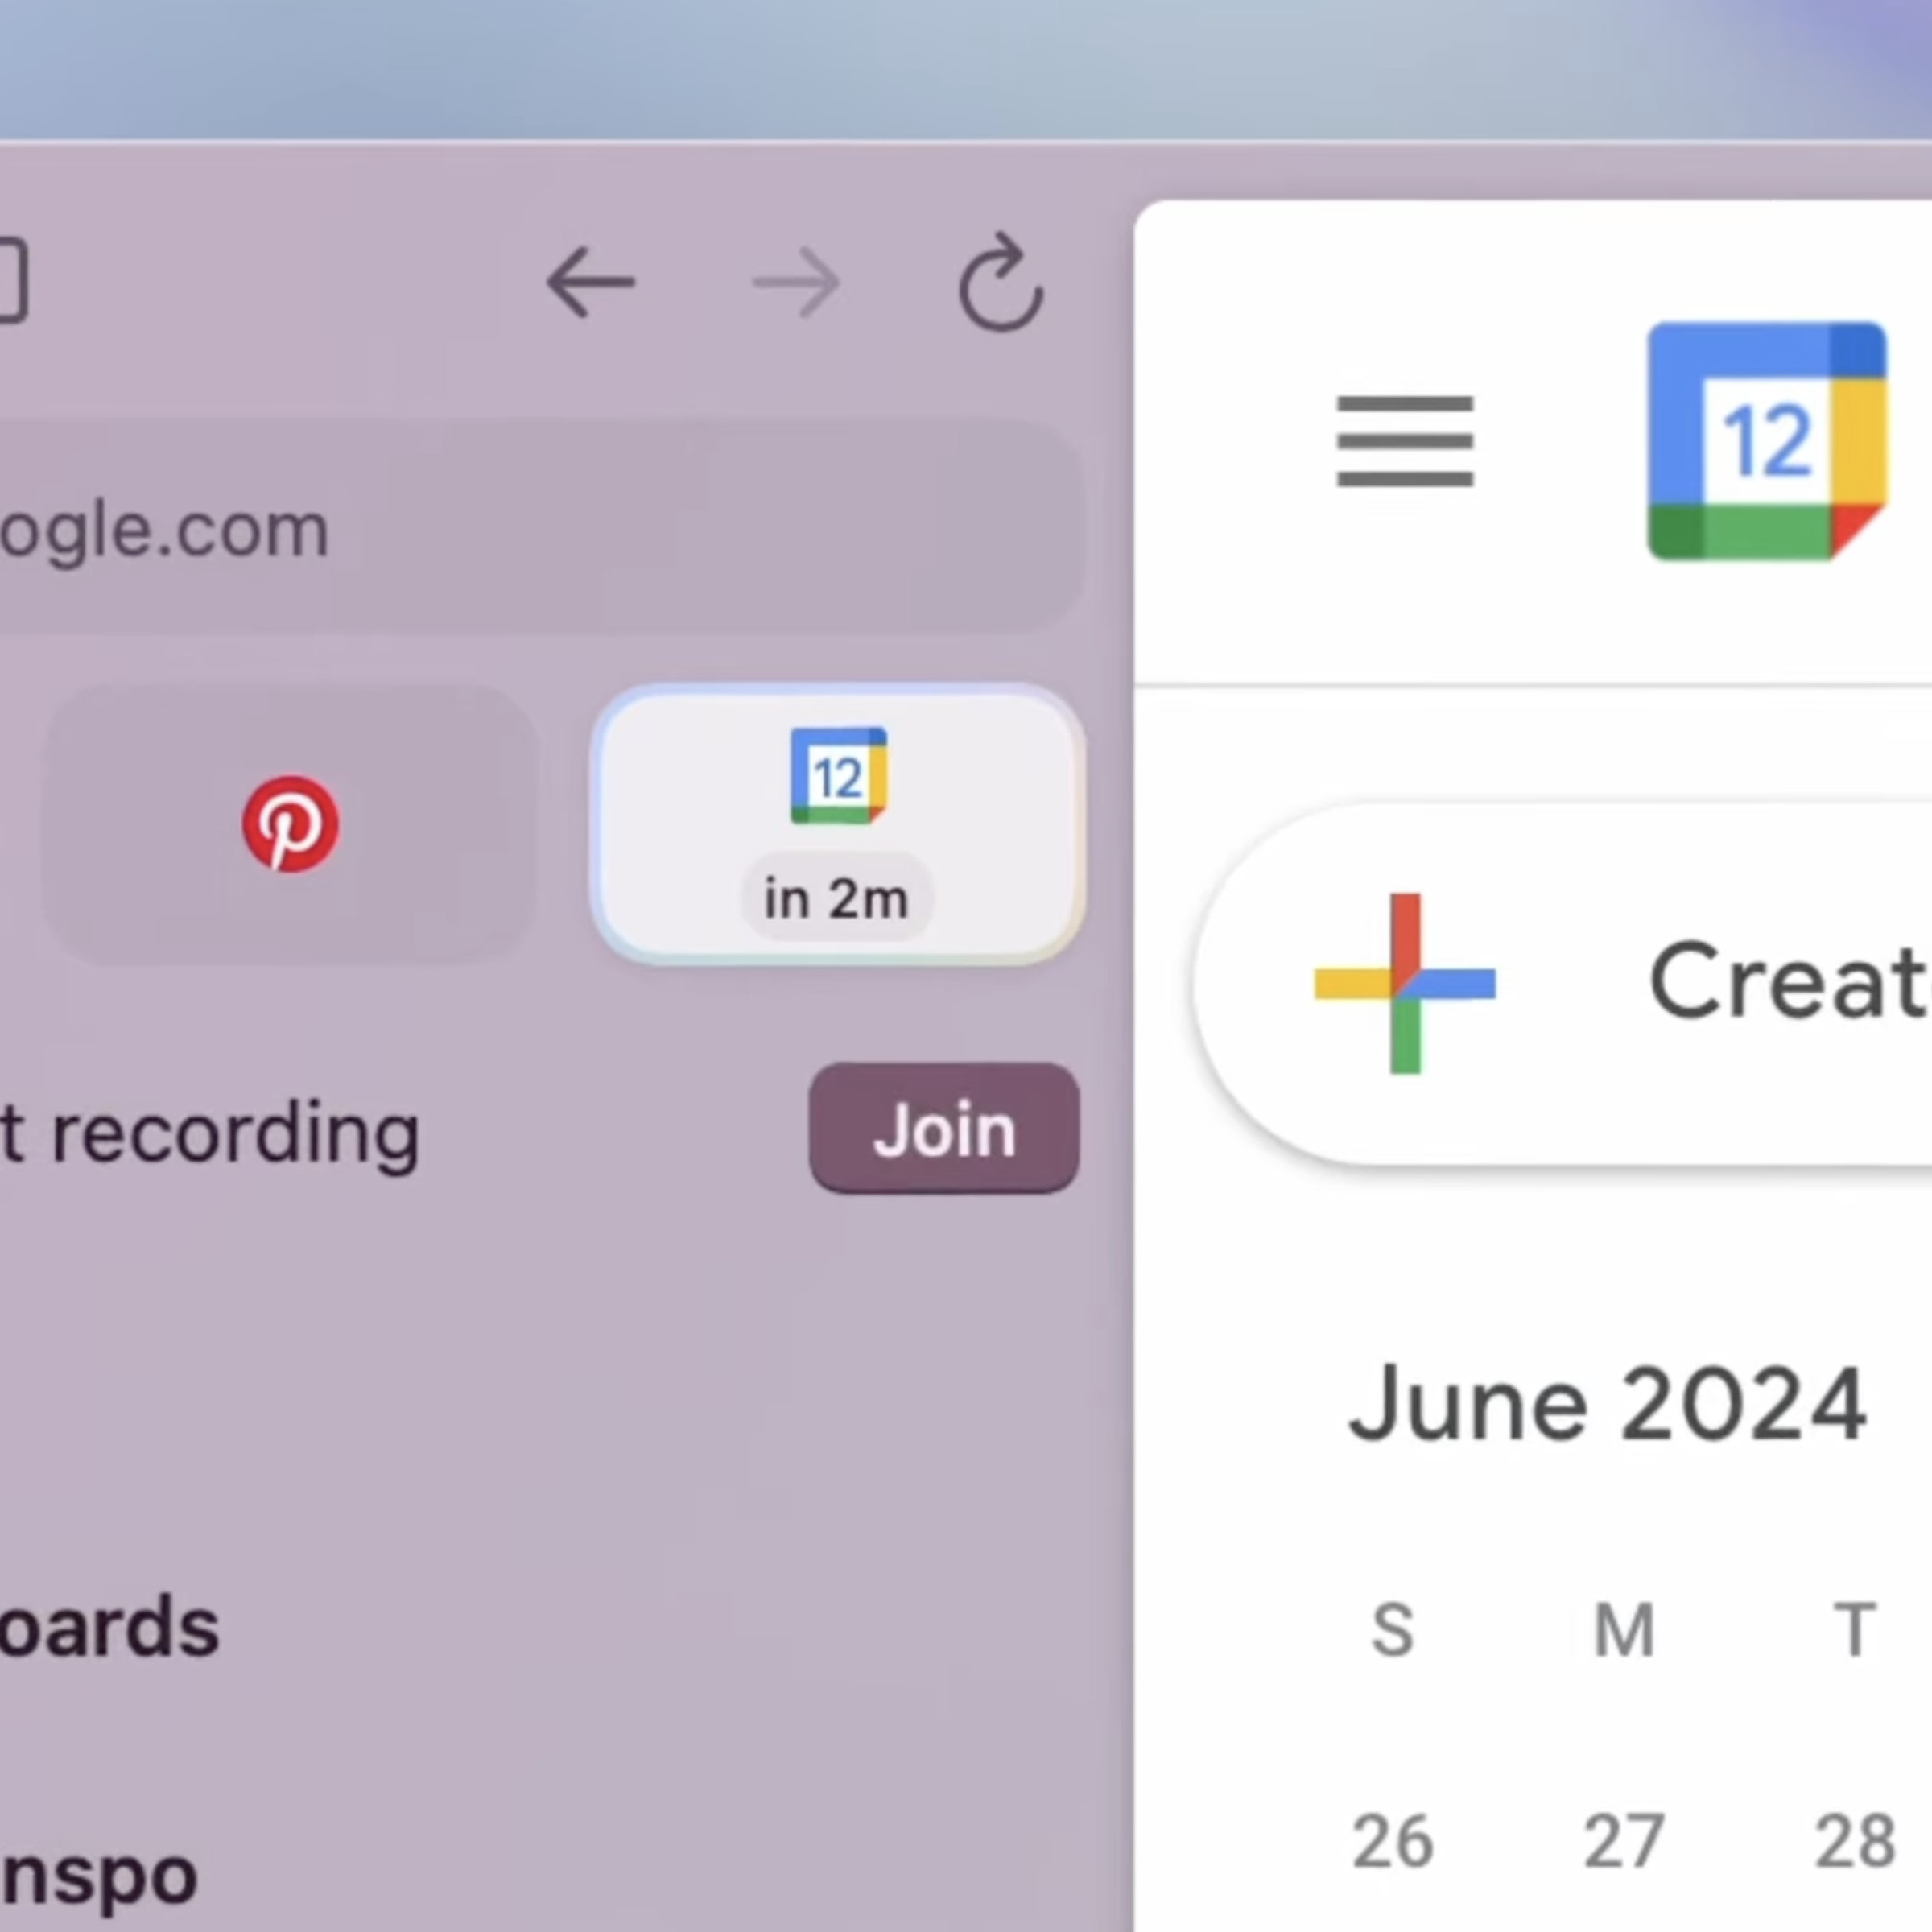 Upper-left corner of Arc window showing a podcast recording join button under the Google Calendar tab